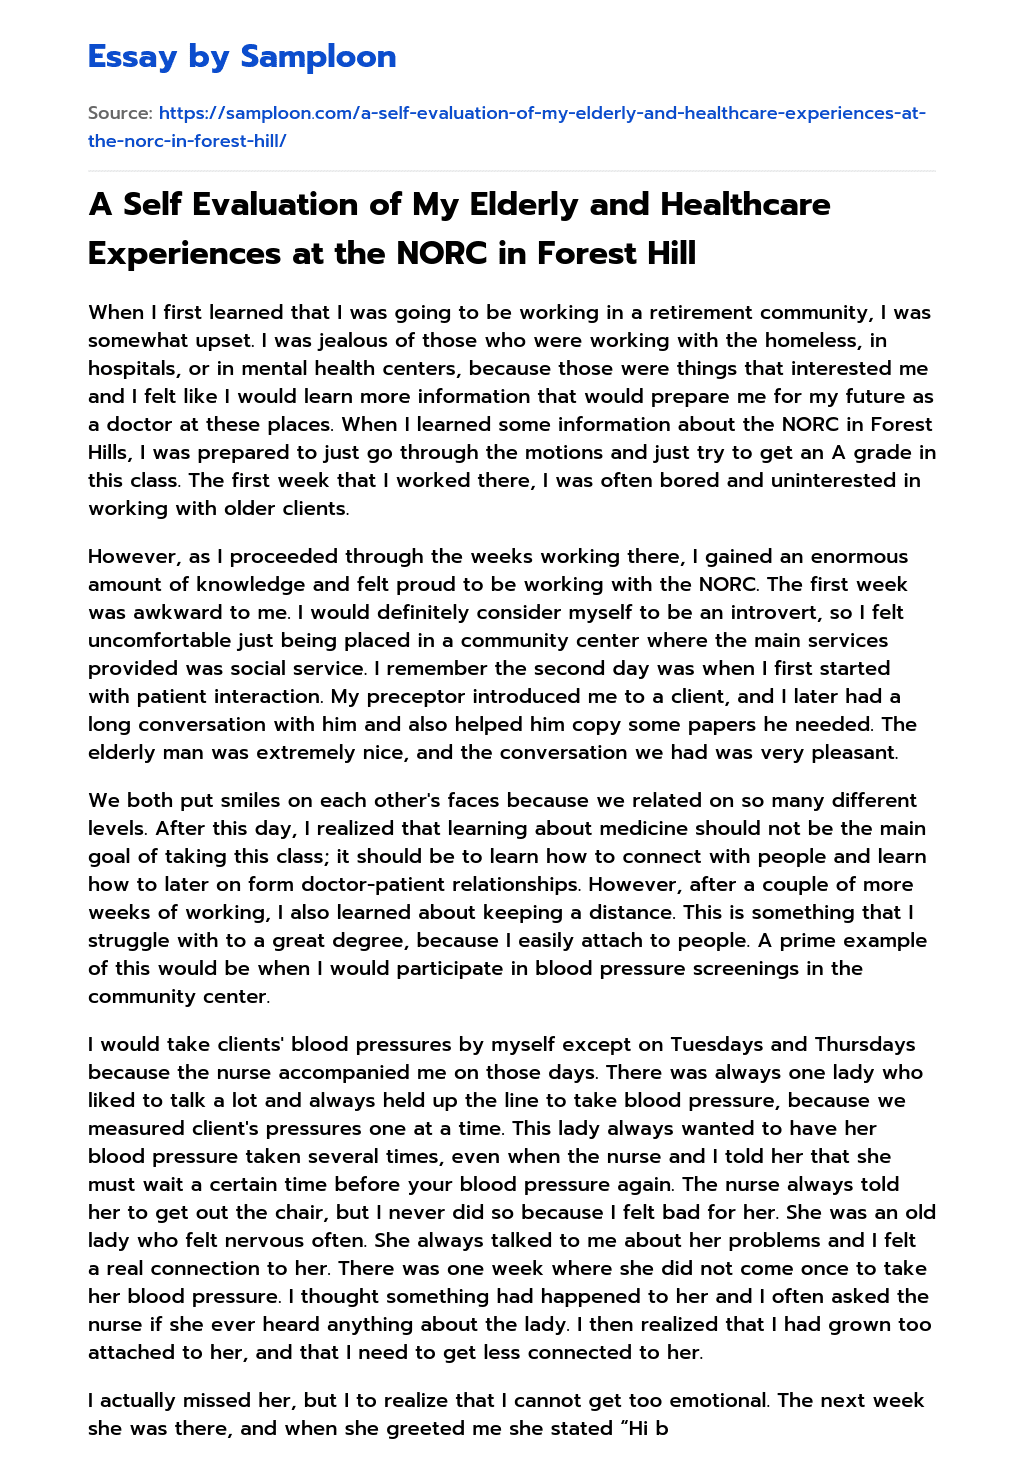 A Self Evaluation of My Elderly and Healthcare Experiences at the NORC in Forest Hill essay